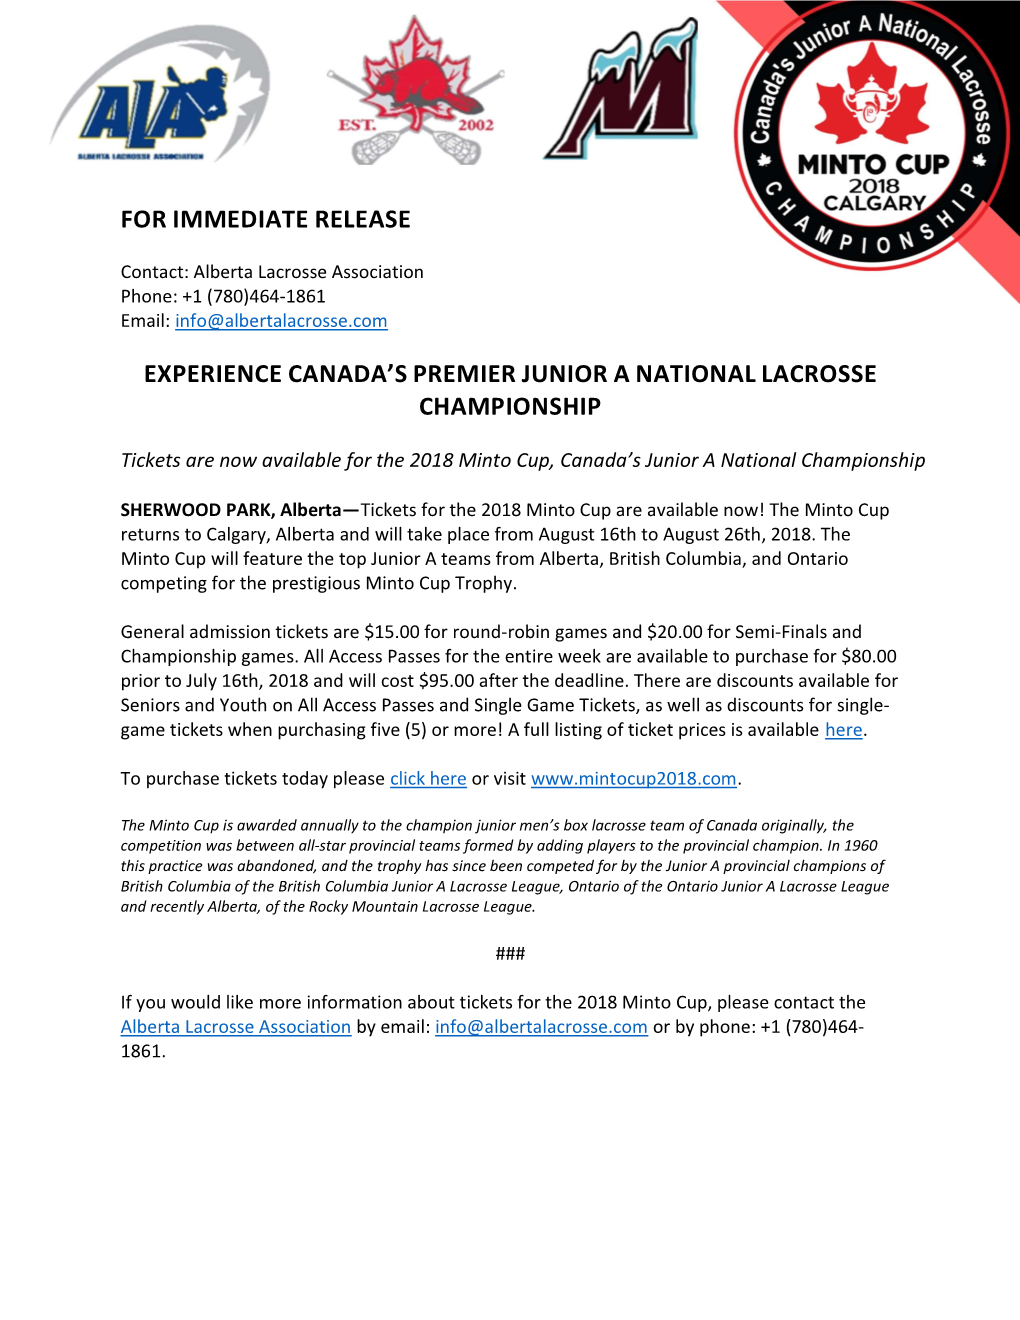 For Immediate Release Experience Canada's